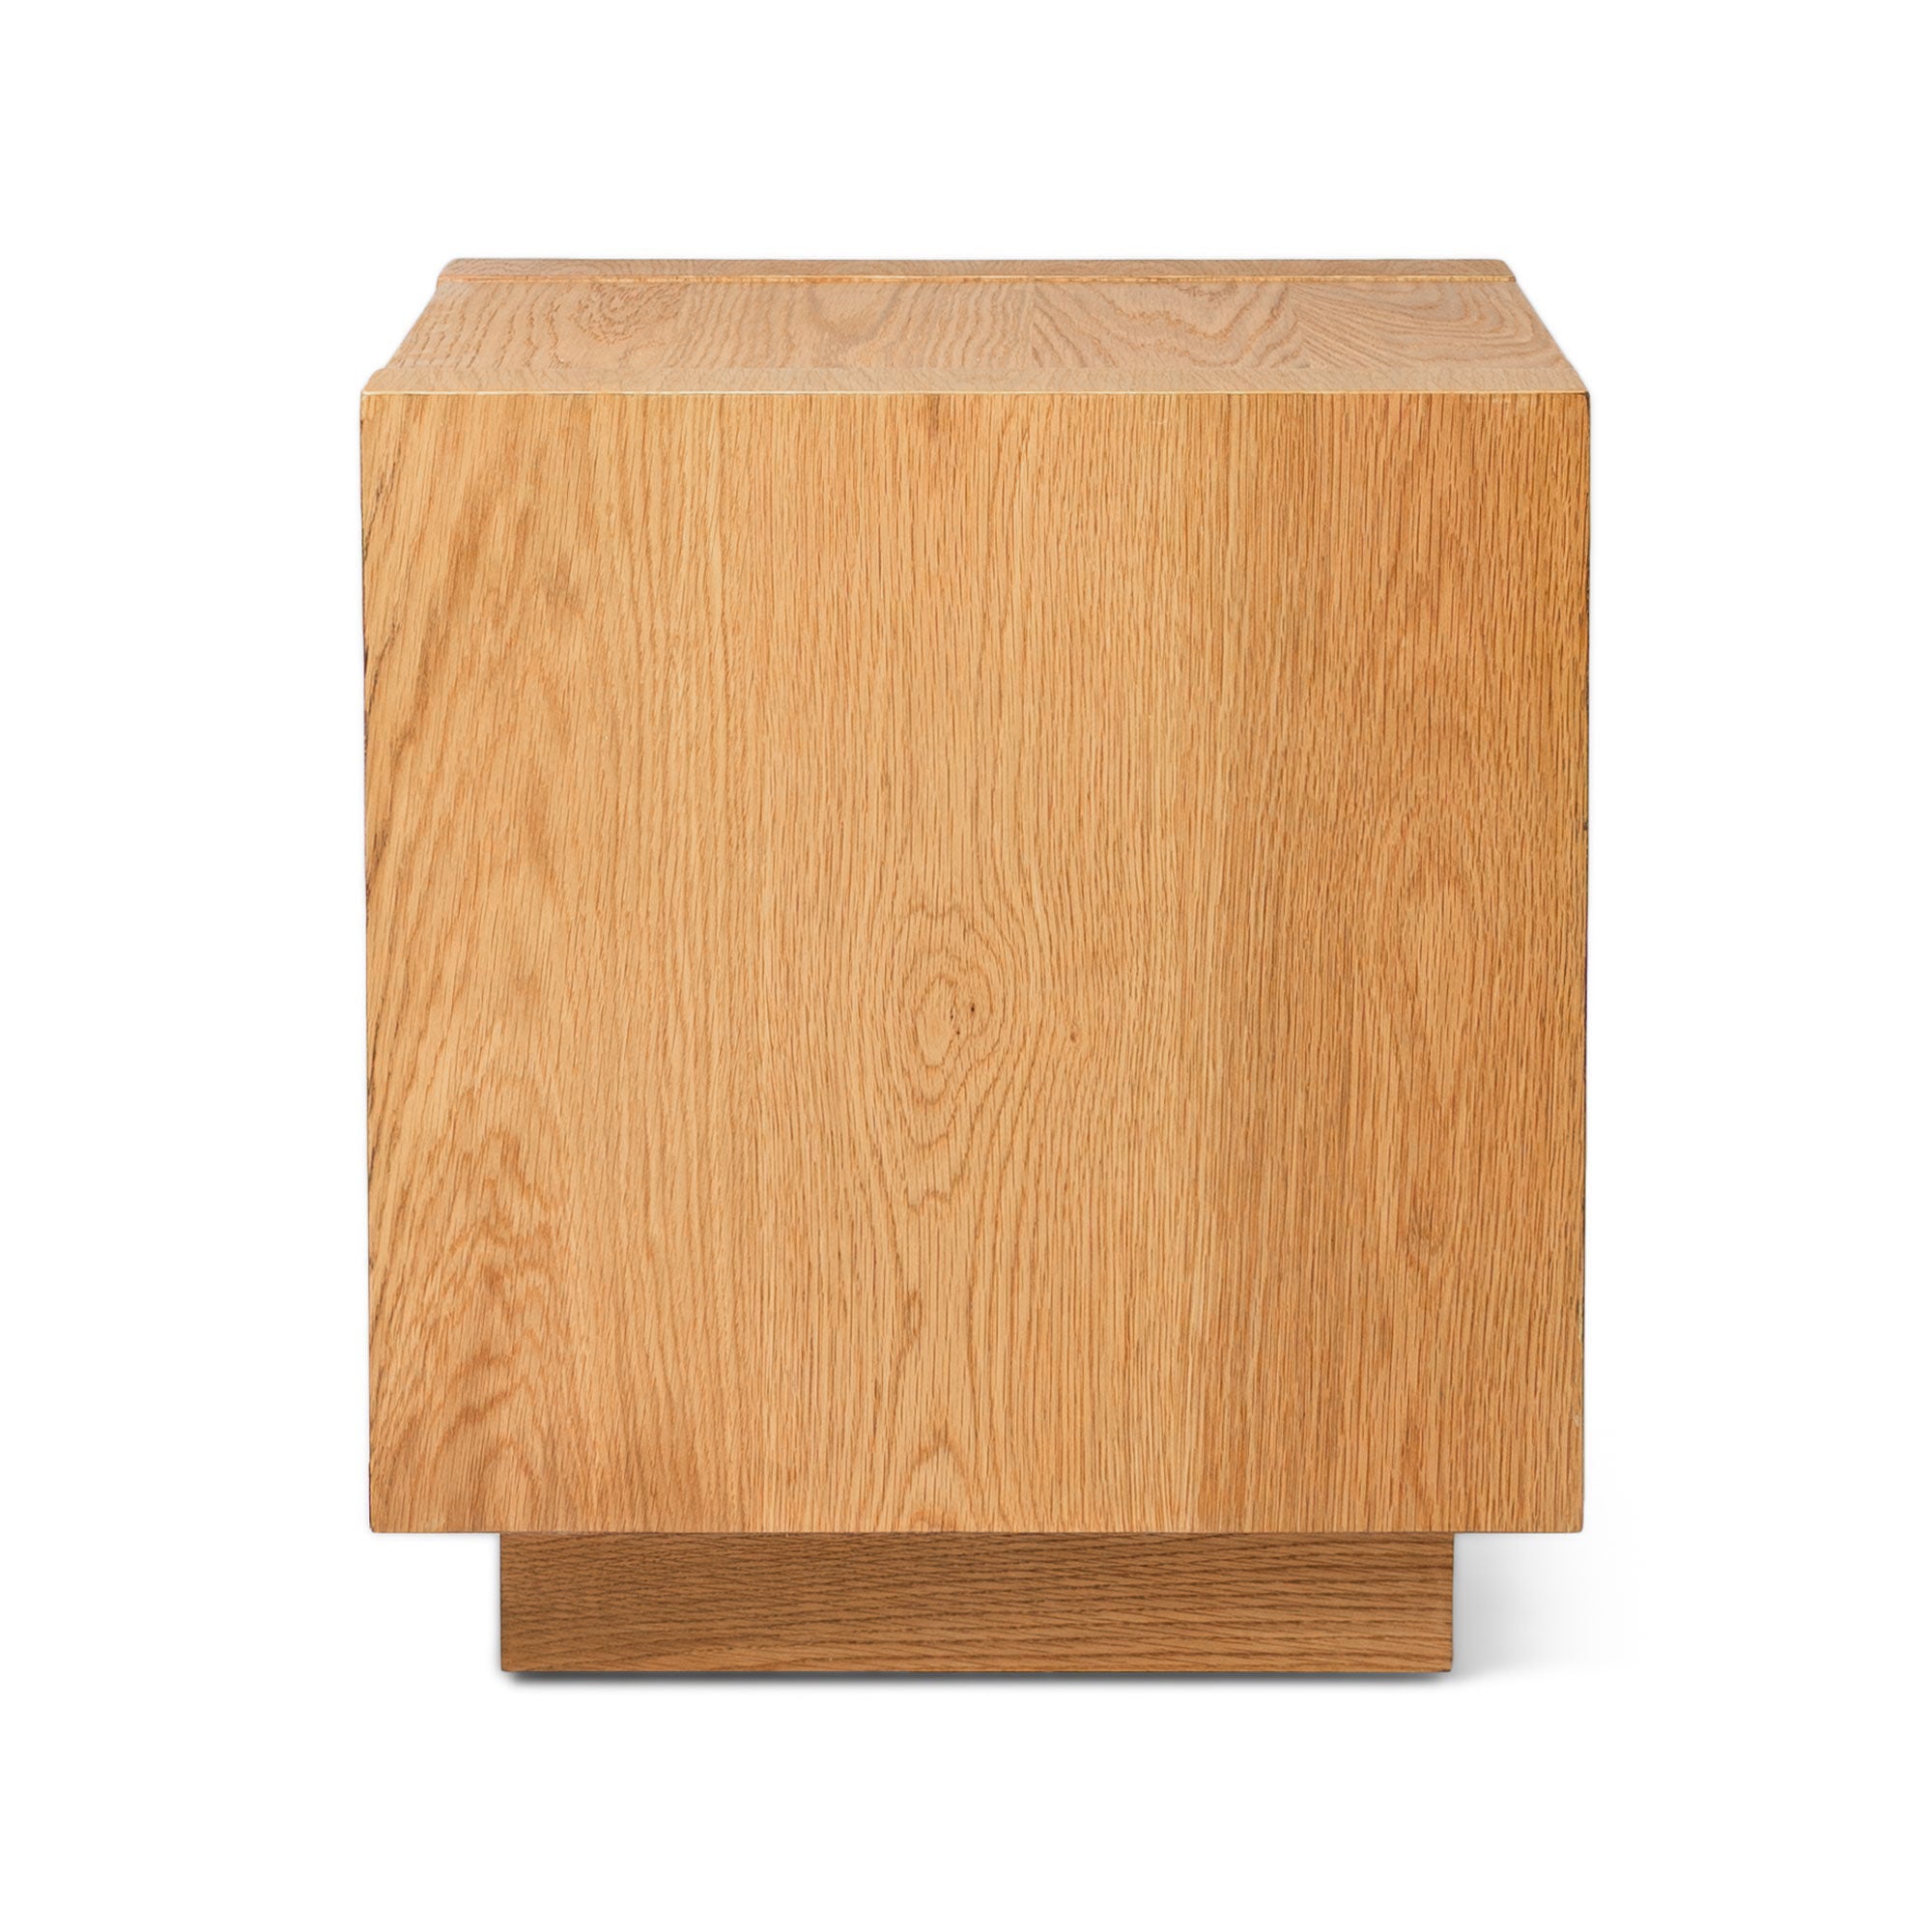 Artemis Contemporary Wooden Side Table in Refined Natural Finish in Accent Tables by Maven Lane